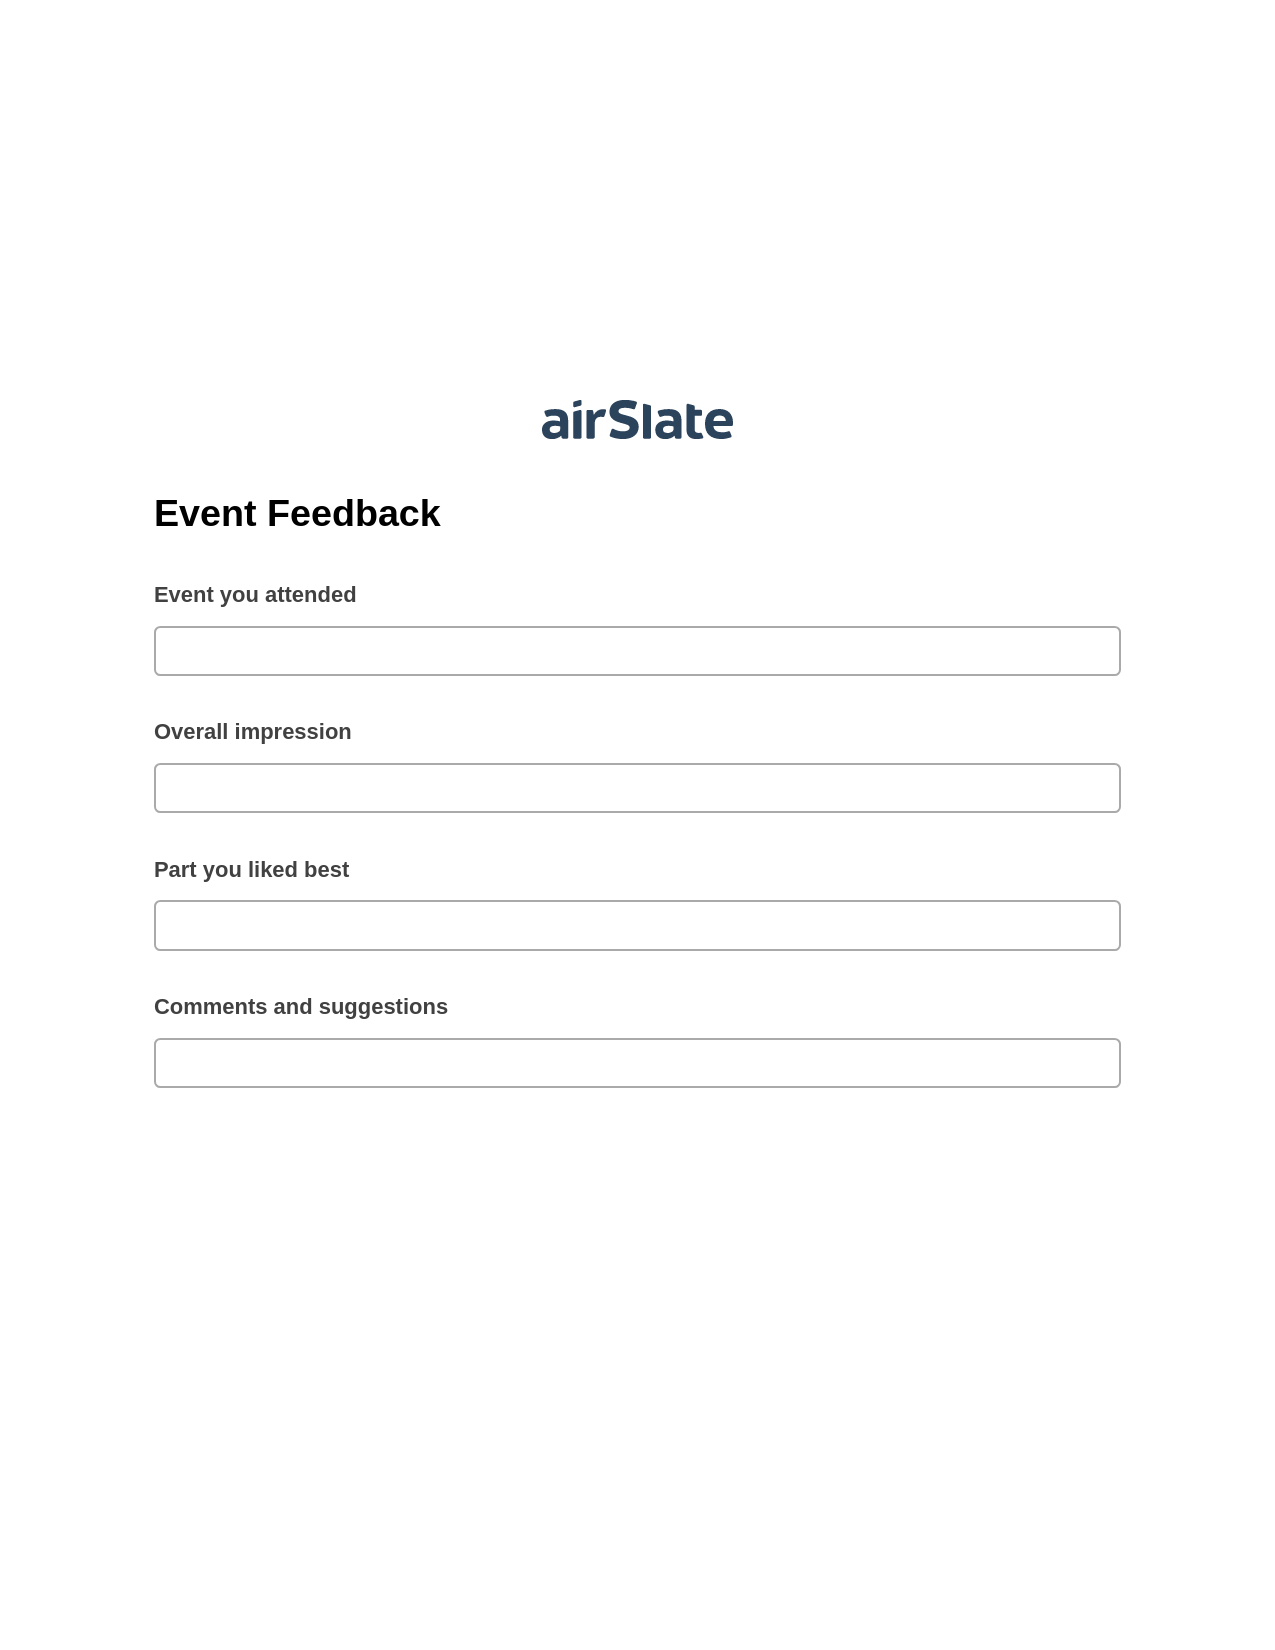 Event Feedback Pre-fill Slate from MS Dynamics 365 Records Bot, Remove Slate Bot, Export to NetSuite Record Bot